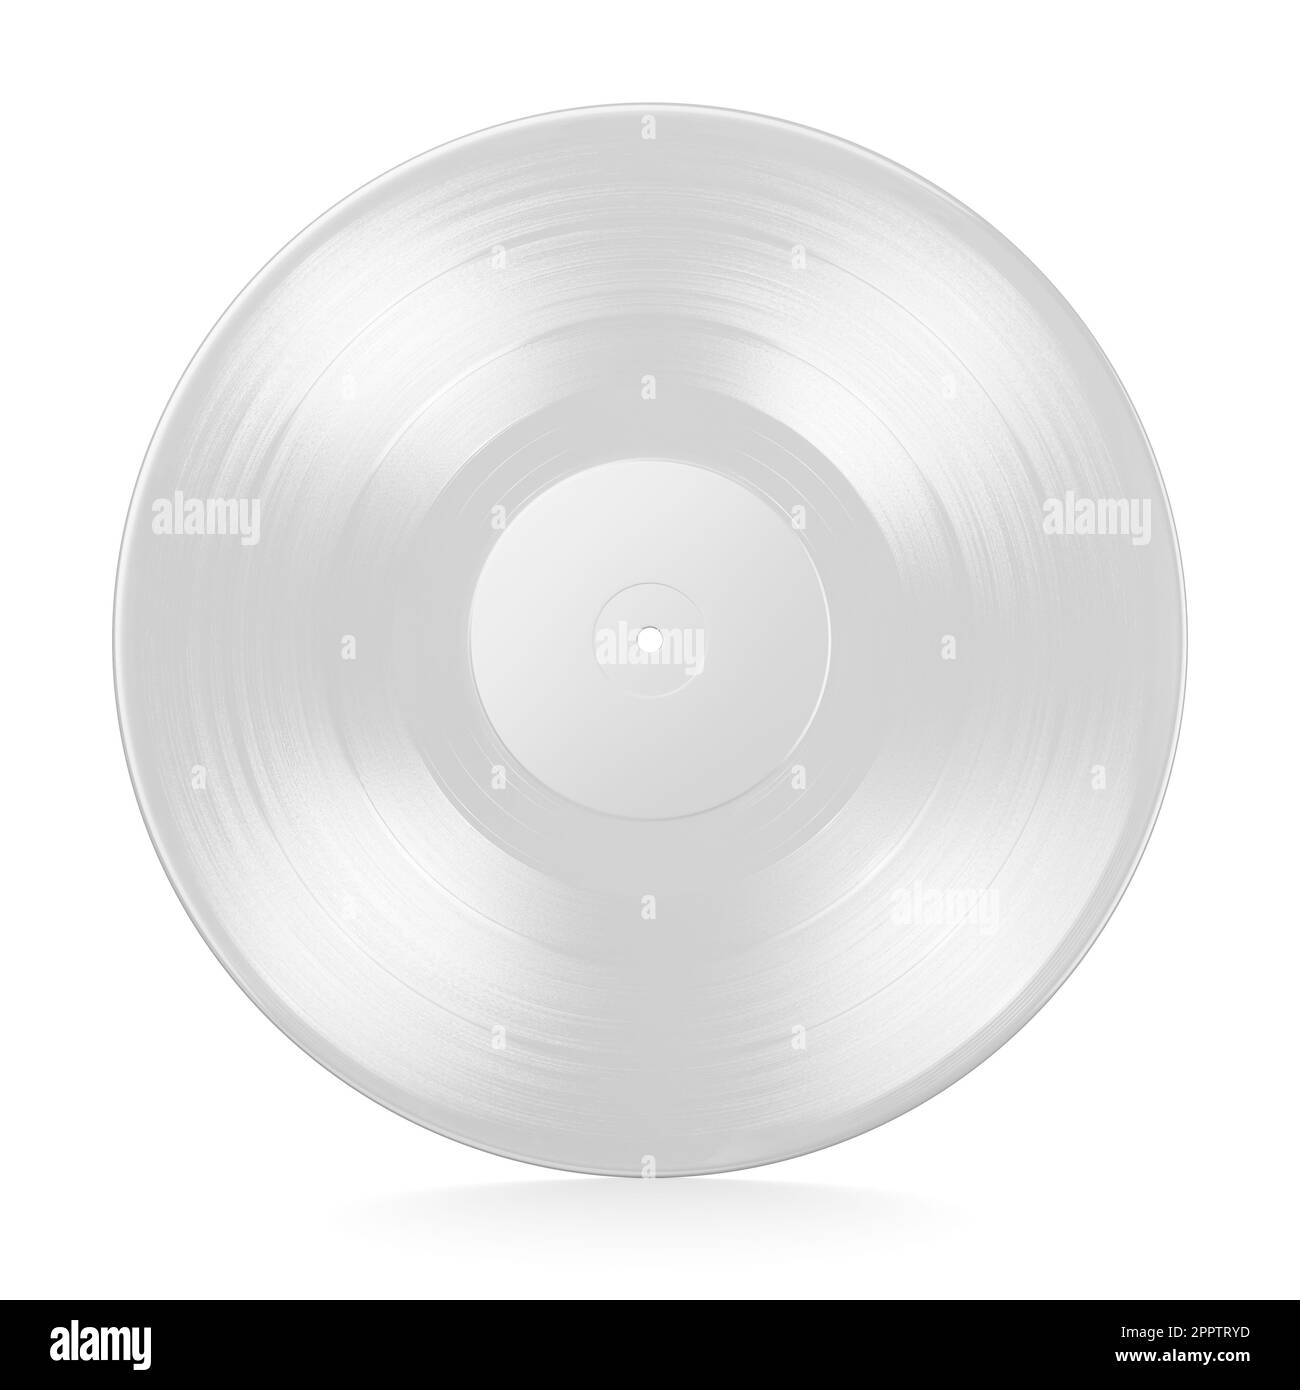 12-inch white vinyl LP record isolated on white background. 3D rendering illustration. Stock Photo